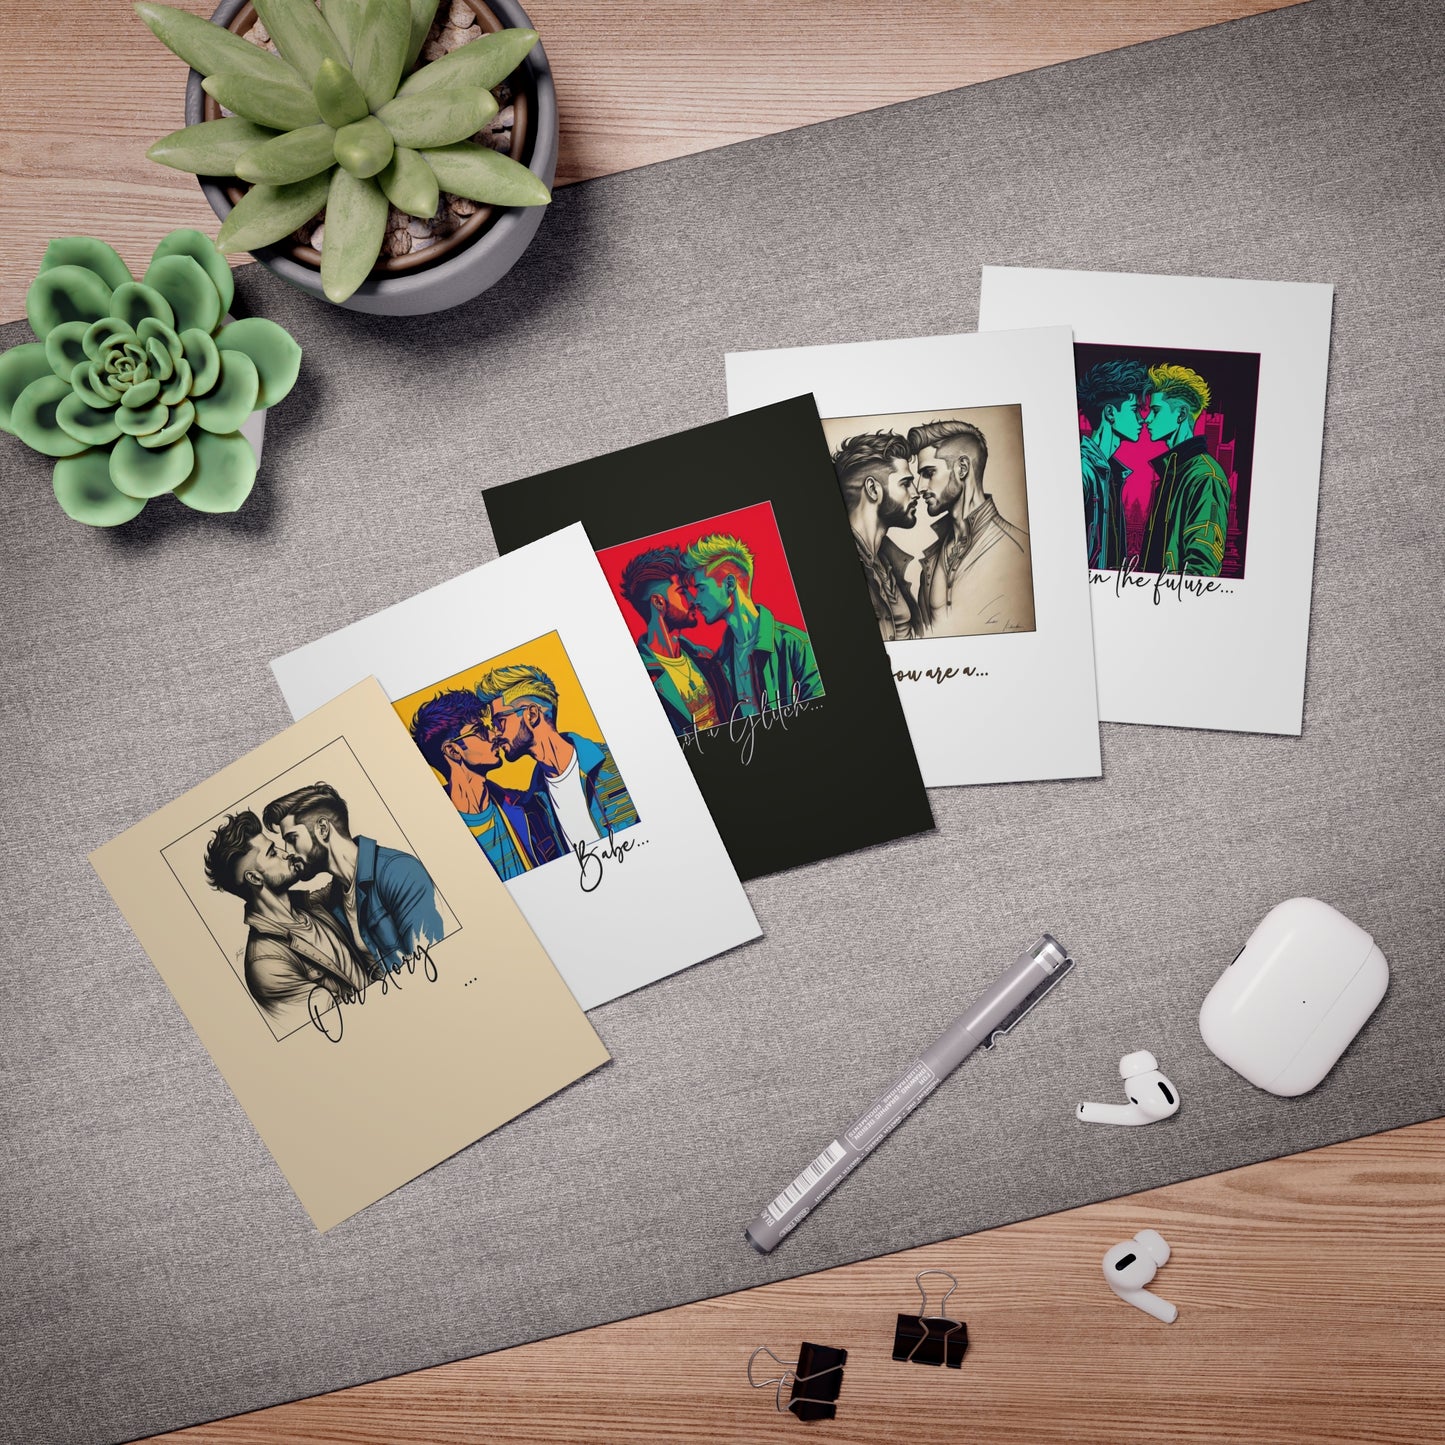 Male Couple Greeting Cards Option 7-Special Occasion-Gay Couple featuring two men-Multi-Design Greeting Cards (5-Pack)-LGBTQ+ Holiday Cards